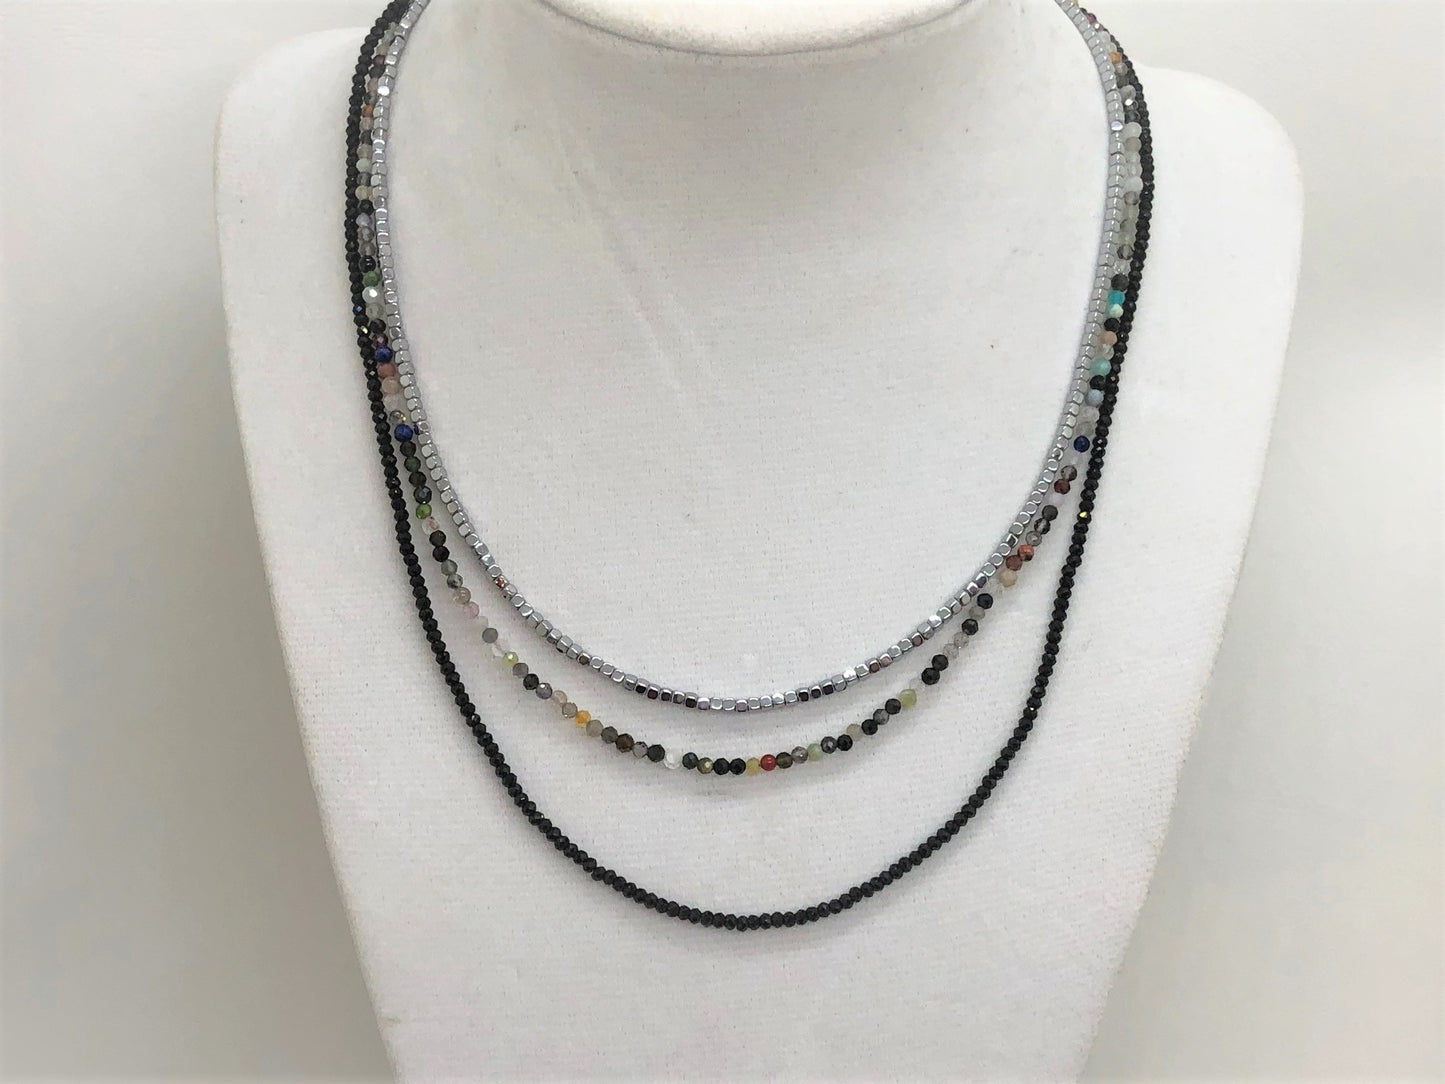 Triple Gemstone Short Necklace with Onyx, Mixed Quartz and Silver Hematite - Emmis Jewelry, Necklace, [product_color]